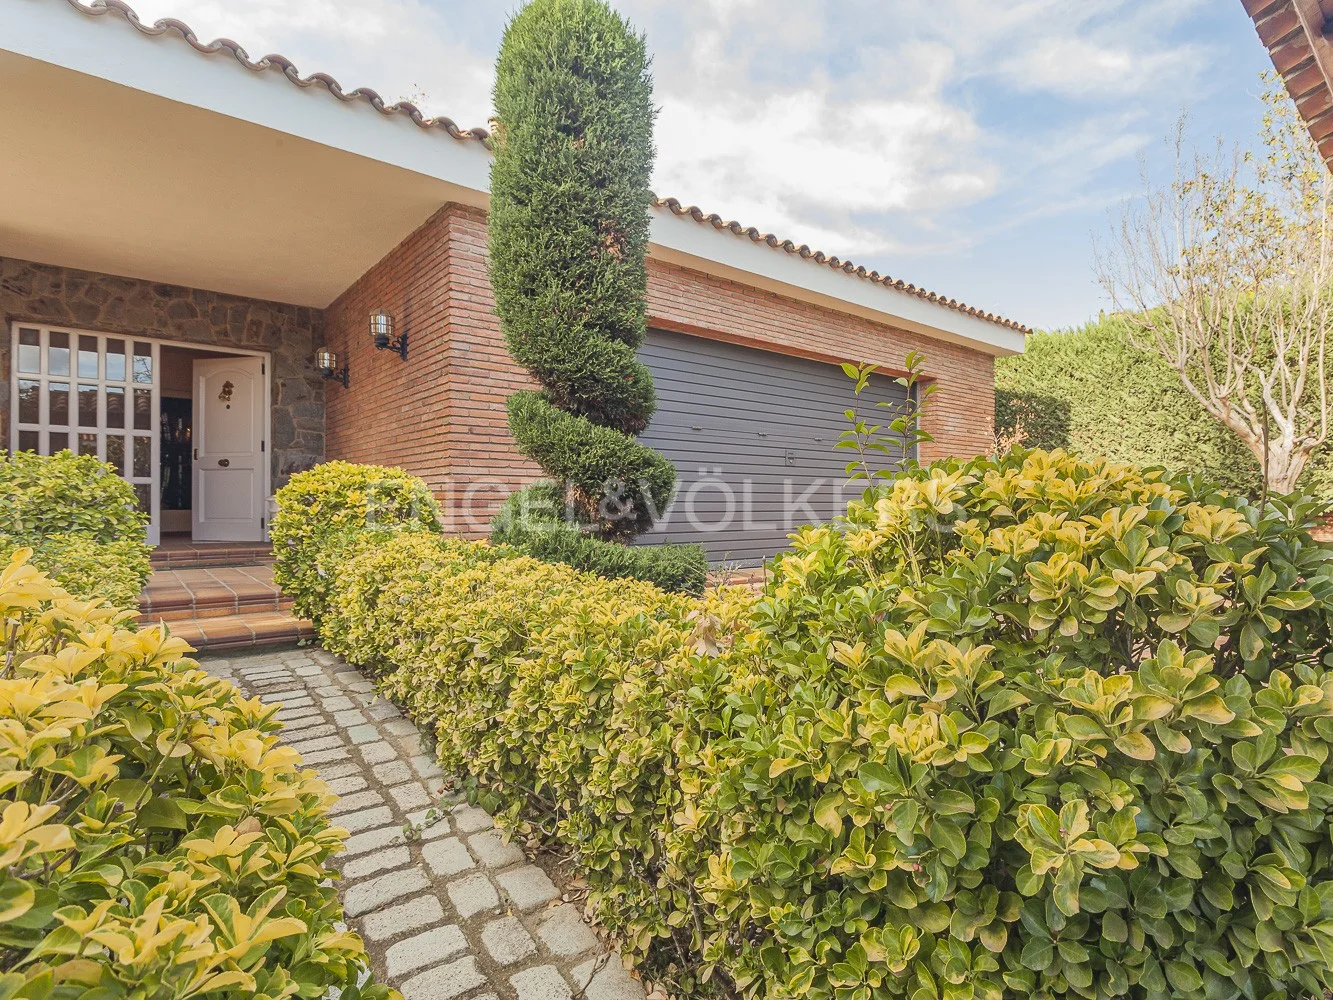 Elegant and exclusive home in Can Pallàs